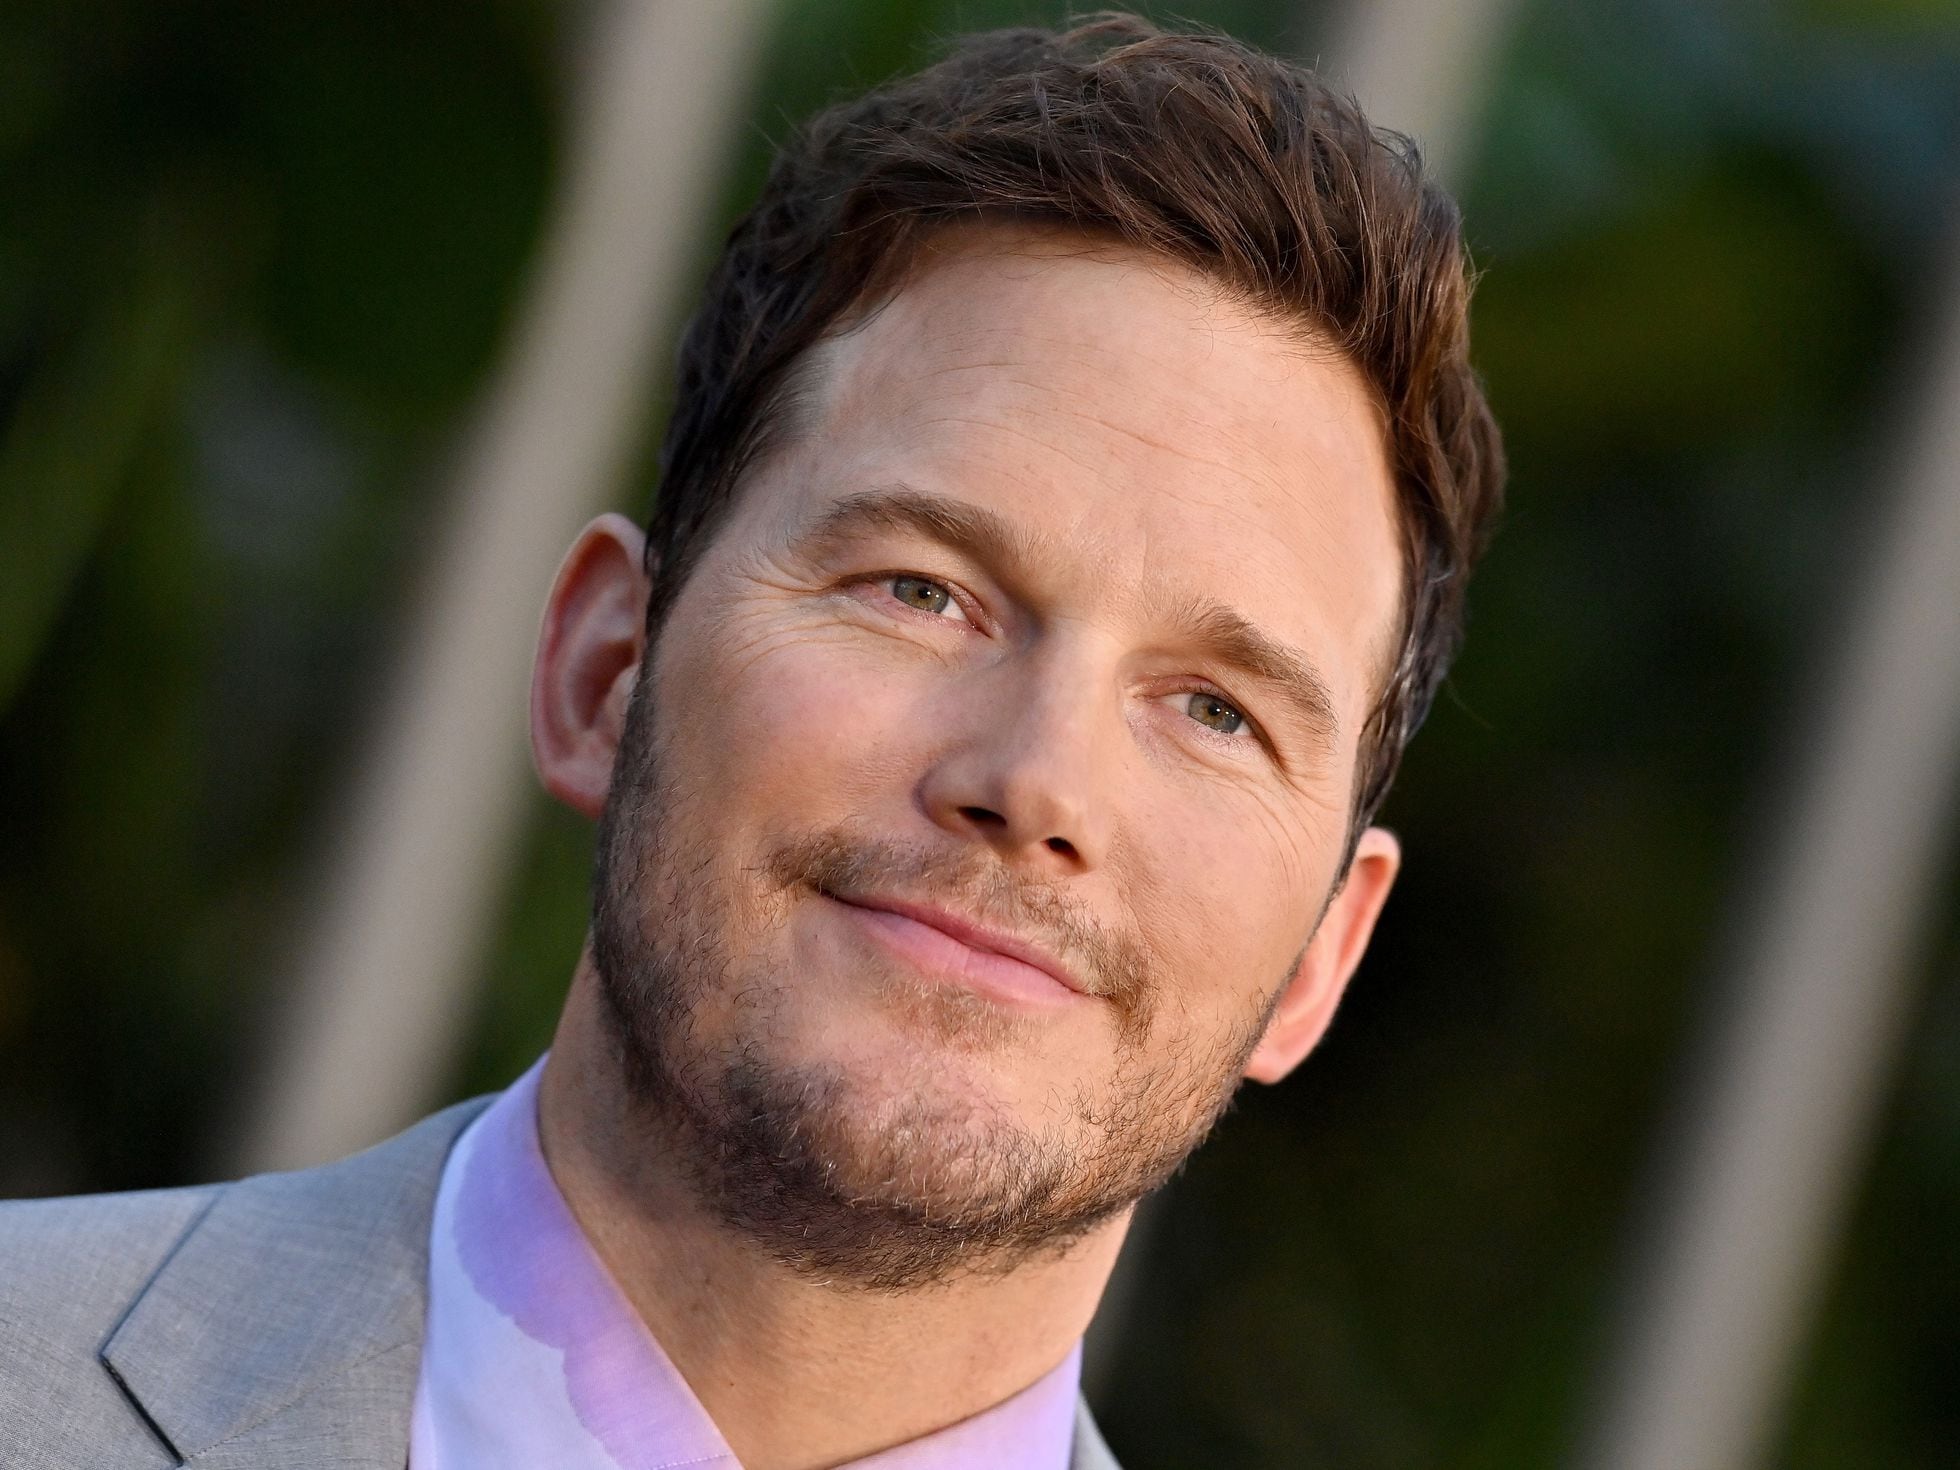 Jack Anna Faris Porn - One has to go': How Chris Pratt became the least liked of all of  Hollywood's actors named Chris | Culture | EL PAÃS English